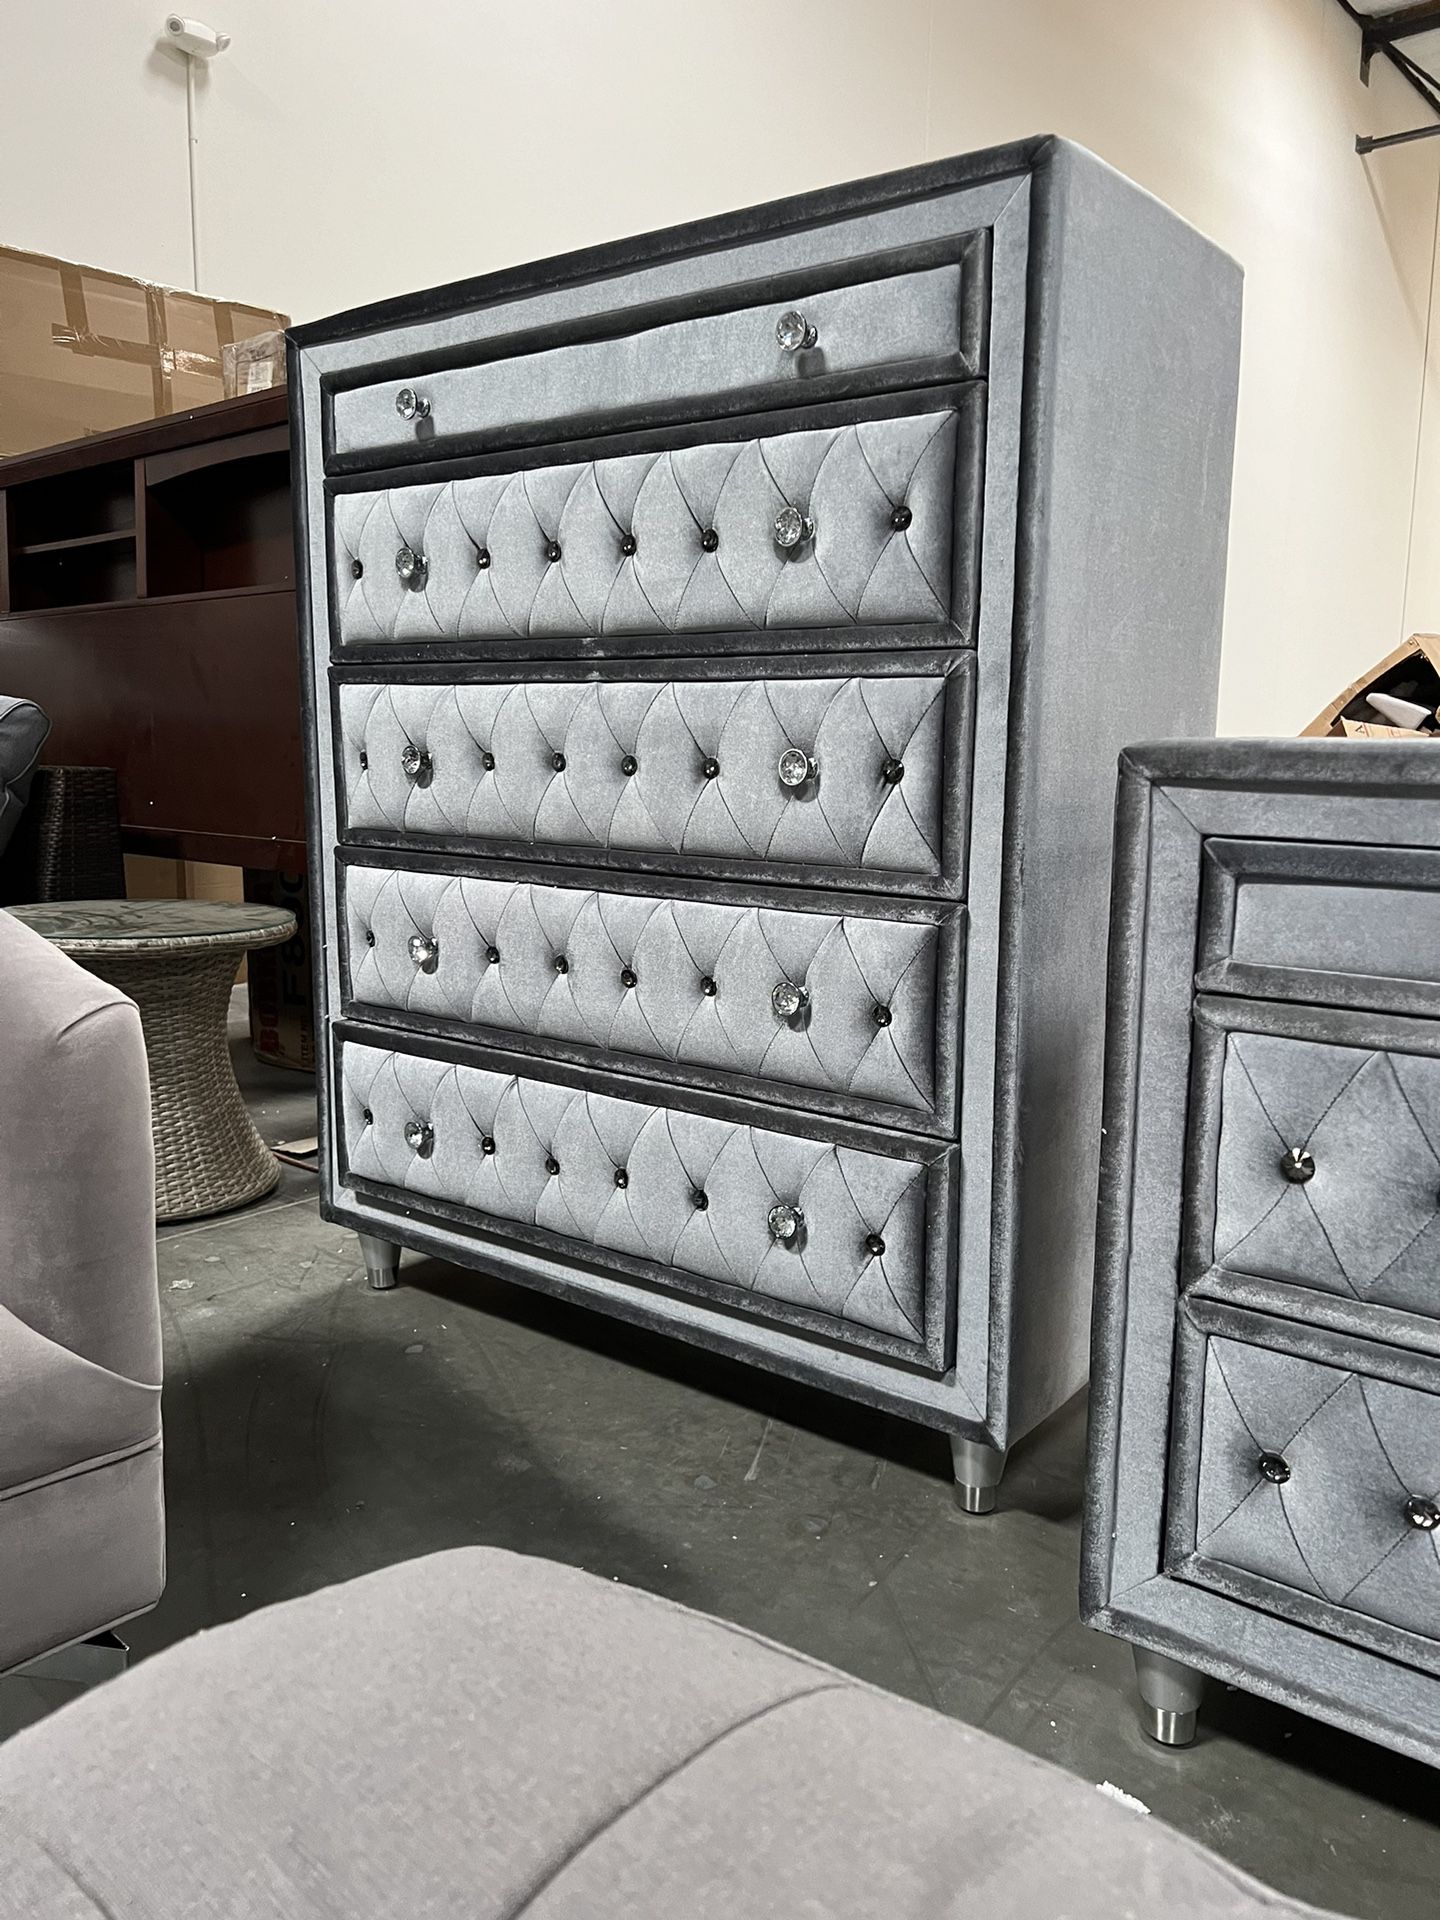 !!!New!!! 5-Drawer Chest, Tall Chest, Grey Chest, Upholstered Chest With Jeweled Knobs, Nightstand With USB Charger, Nightstand, Dresser 